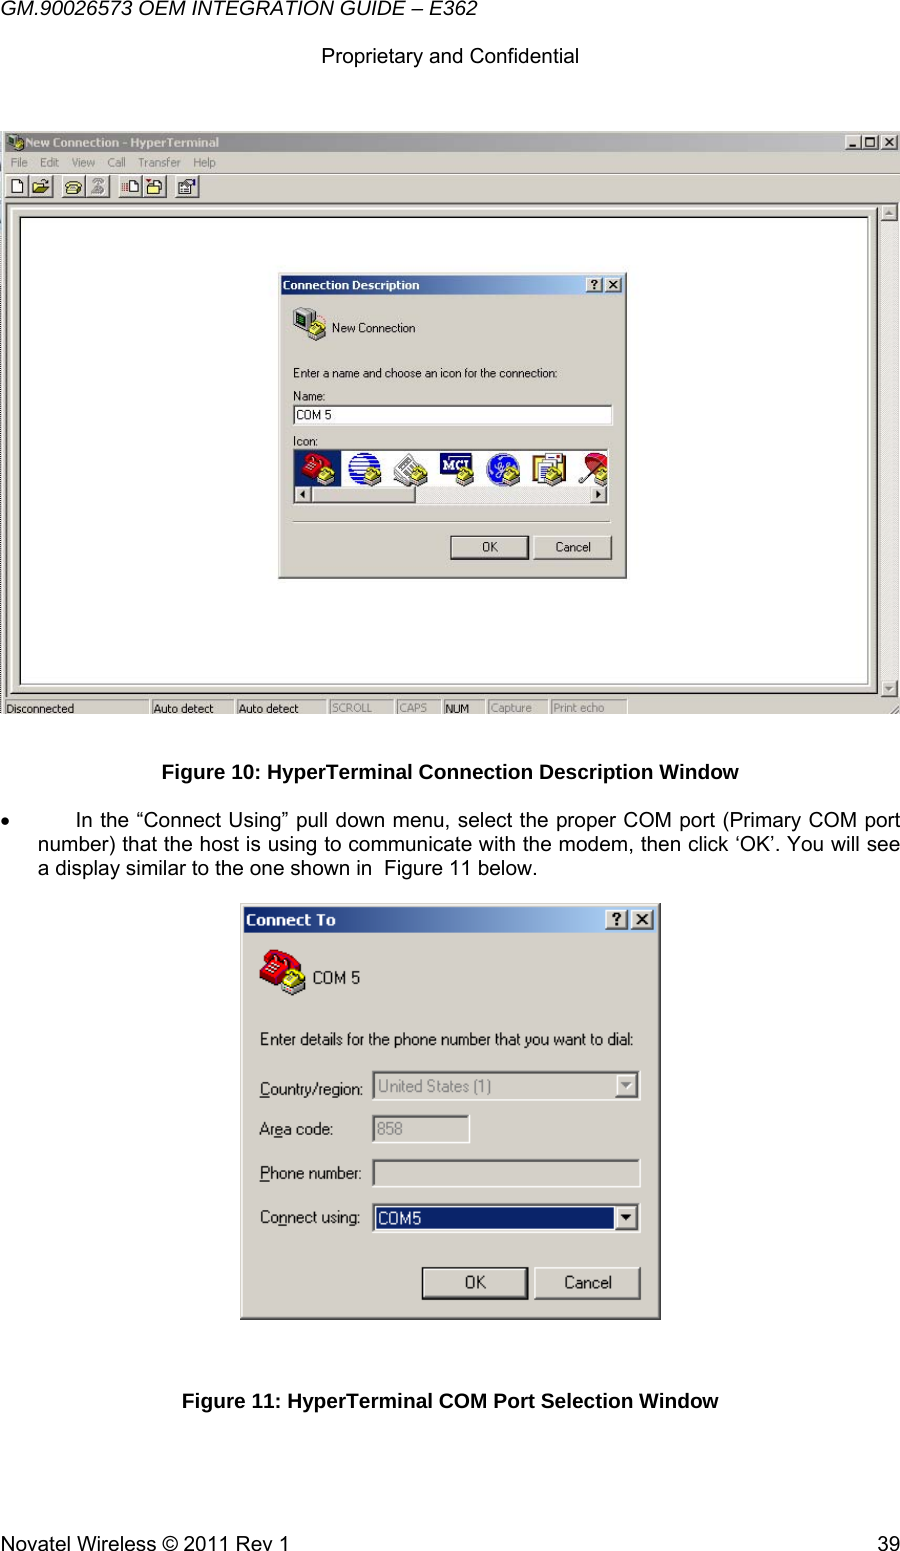 GM.90026573 OEM INTEGRATION GUIDE – E362      Proprietary and Confidential   Novatel Wireless © 2011 Rev 1  39 Figure 10: HyperTerminal Connection Description Window •  In the “Connect Using” pull down menu, select the proper COM port (Primary COM port number) that the host is using to communicate with the modem, then click ‘OK’. You will see a display similar to the one shown in  Figure 11 below.    Figure 11: HyperTerminal COM Port Selection Window  